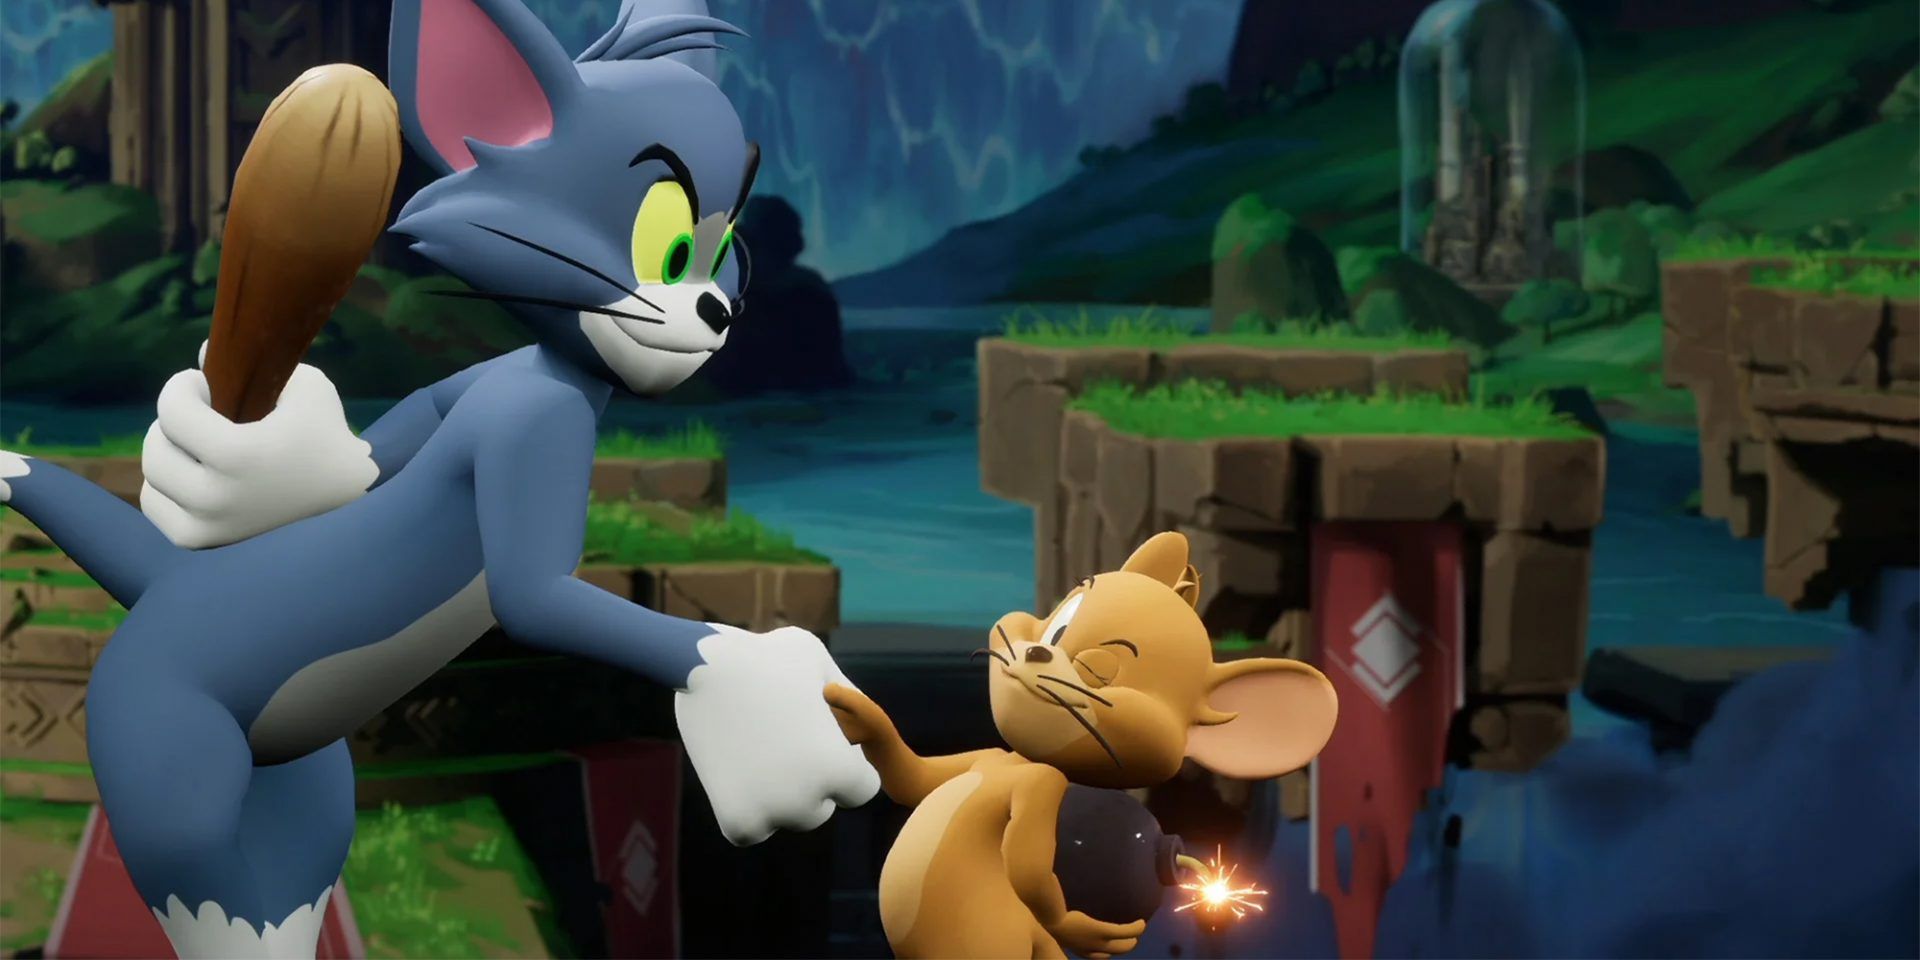 Tom and Jerry Shaking Hands With Weapons In Their Off Hands